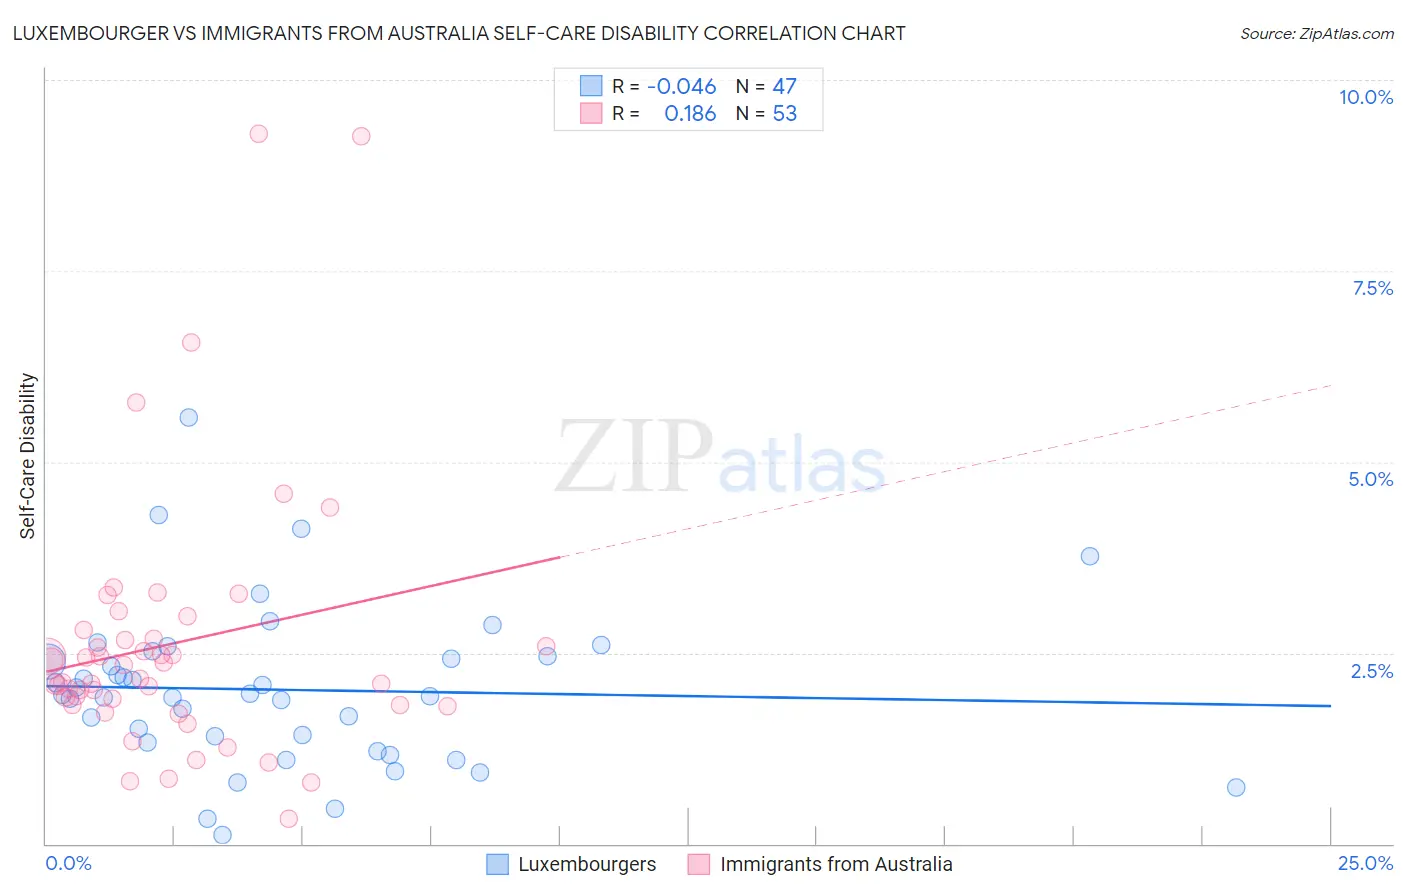 Luxembourger vs Immigrants from Australia Self-Care Disability